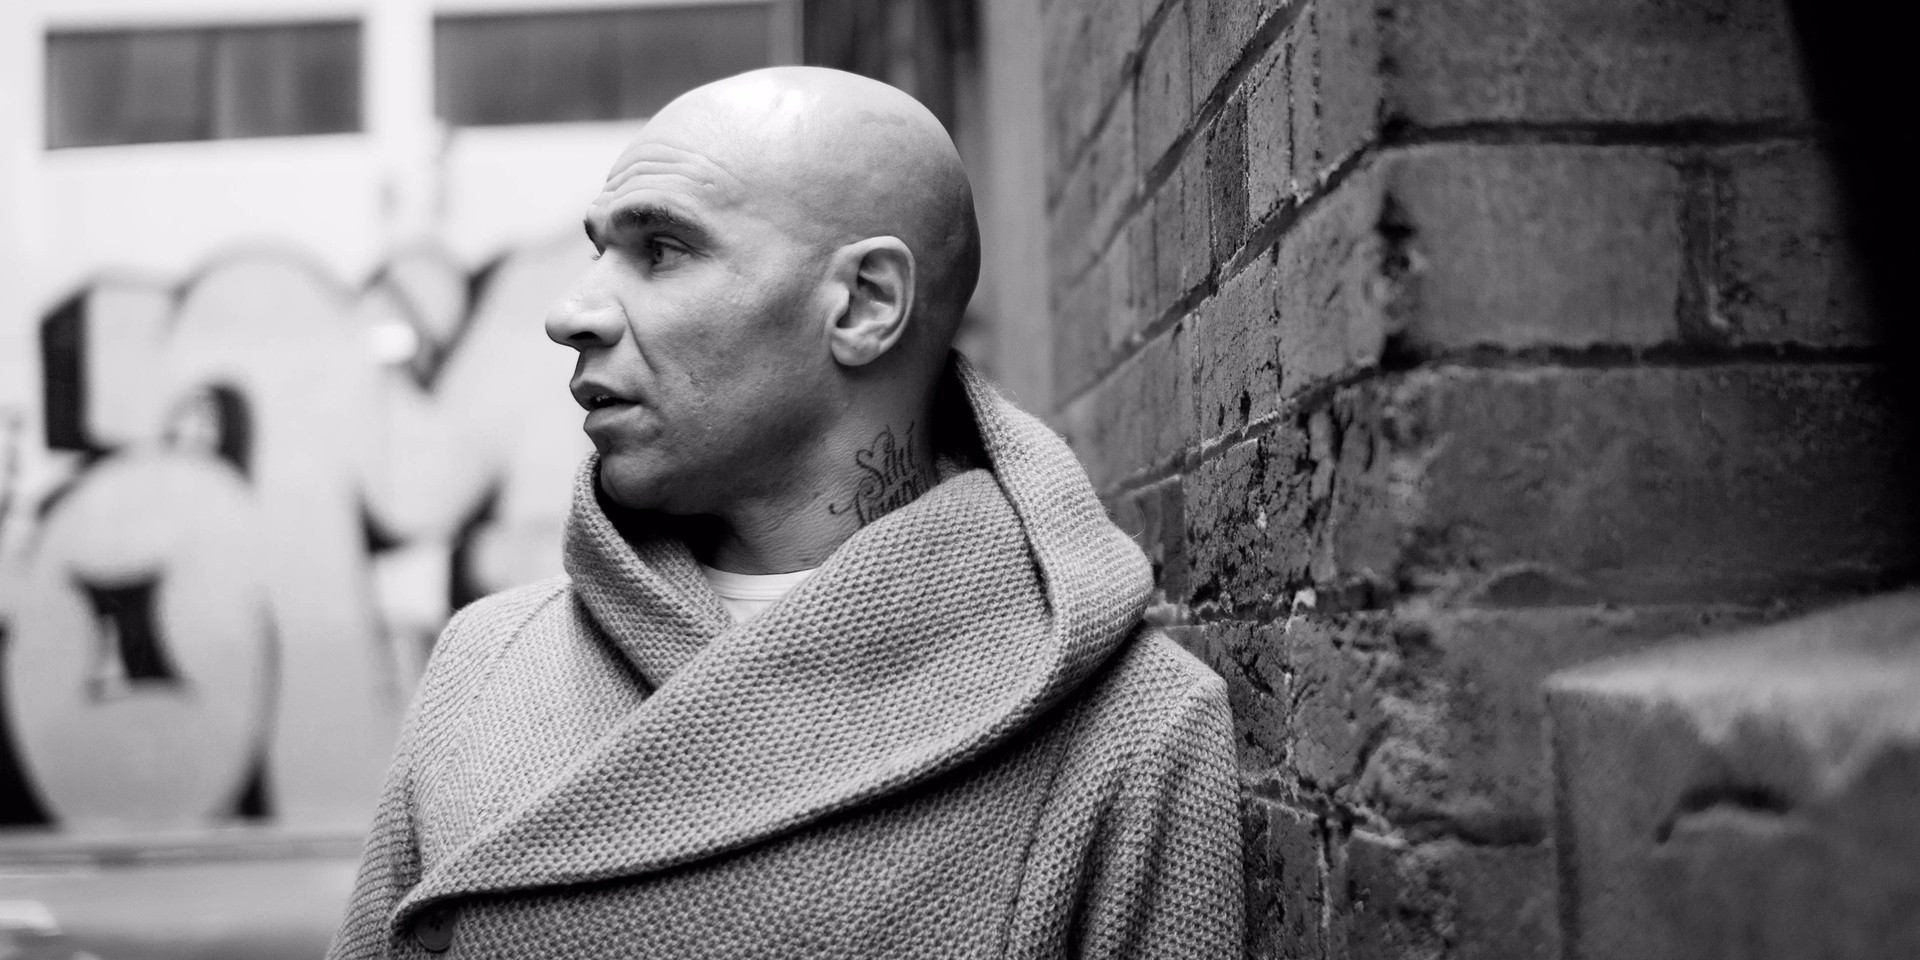 Drum & bass pioneer Goldie returns to Singapore in April